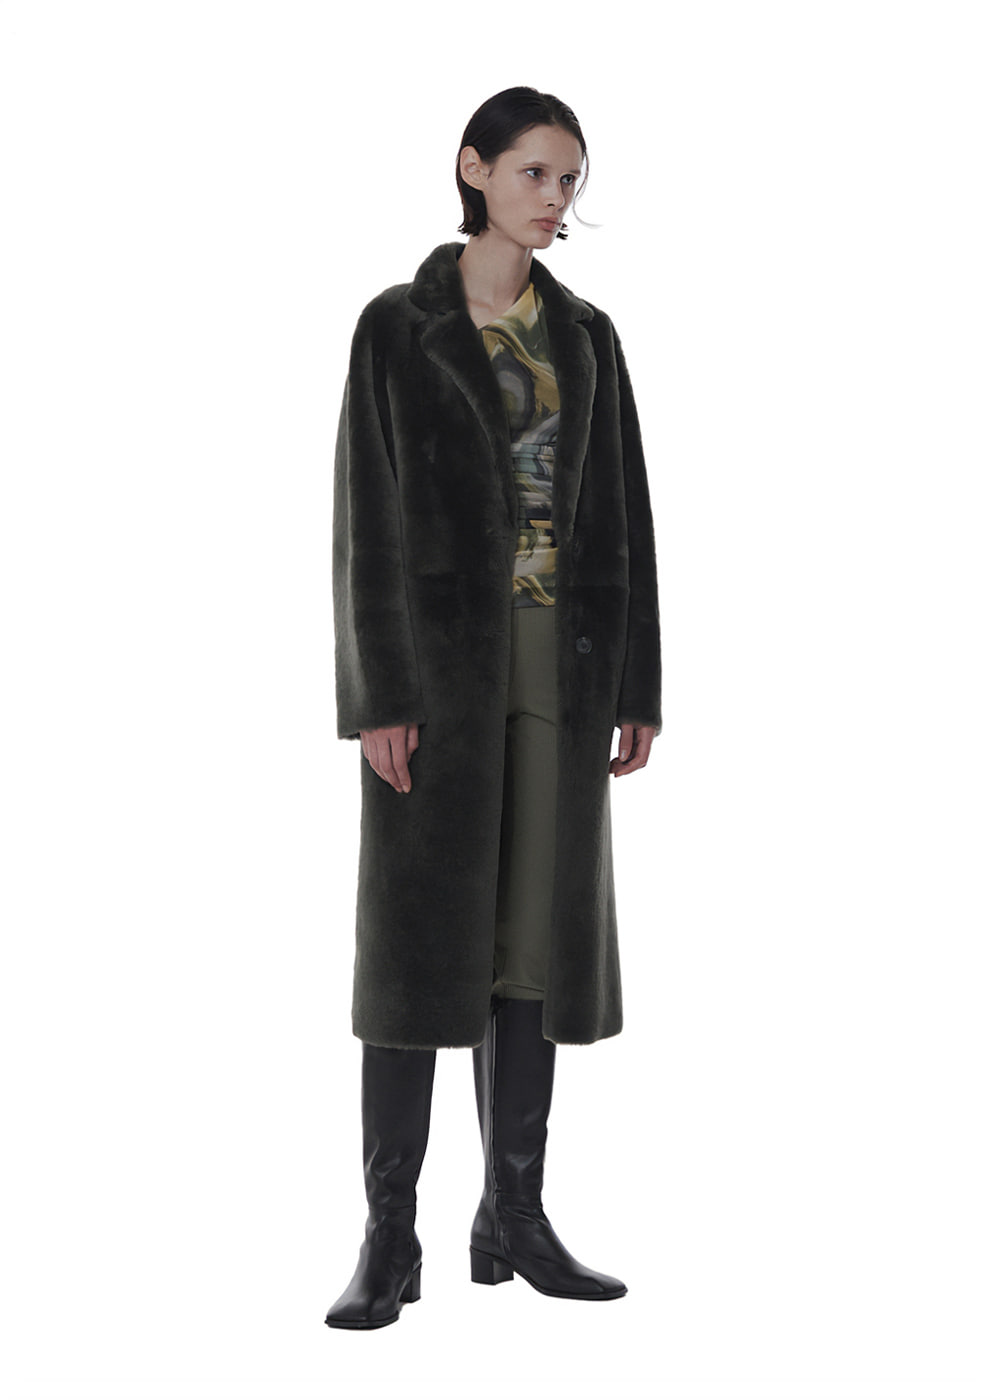 Merino Tailored Collar Long Sheraling Coat Deep GreenMaterial Spanish MerinoPrice 3,890,000This is a long searing coat made of Merino material that is light, soft with a tailored collar.